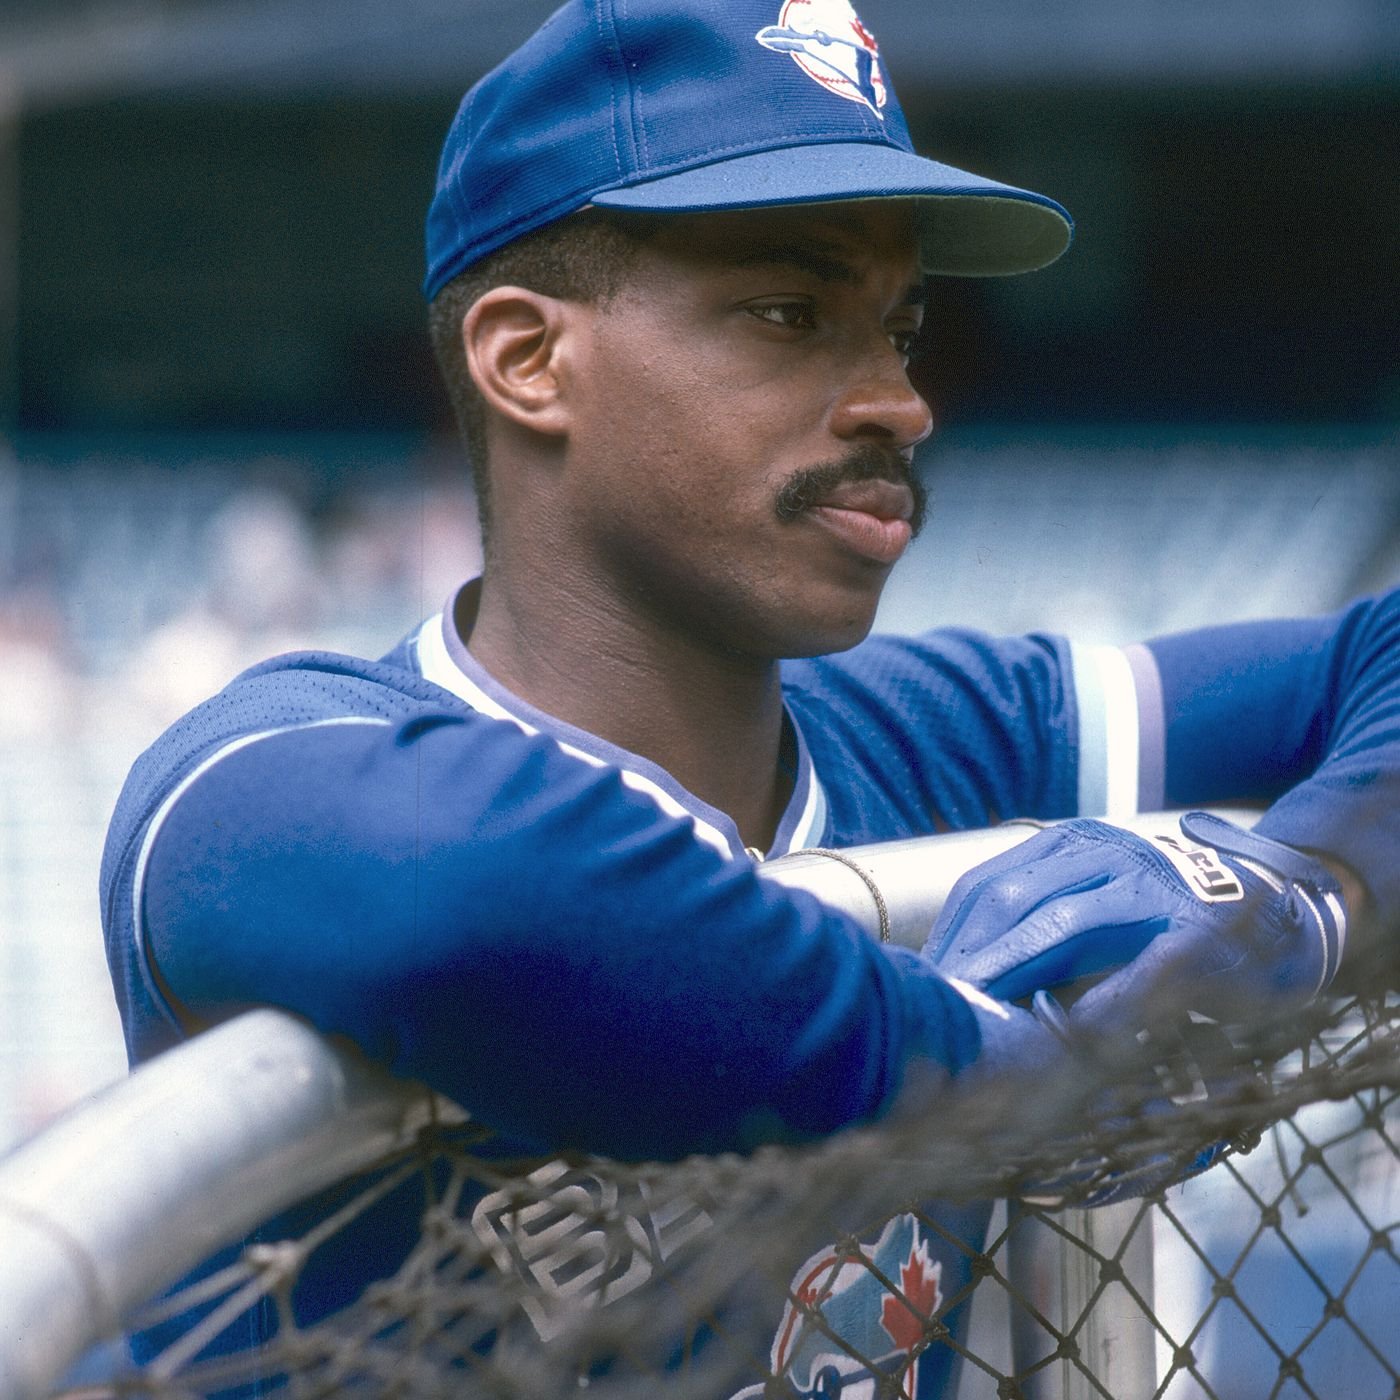 Braves, Blue Jays' Great Fred McGriff Elected to Baseball Hall of